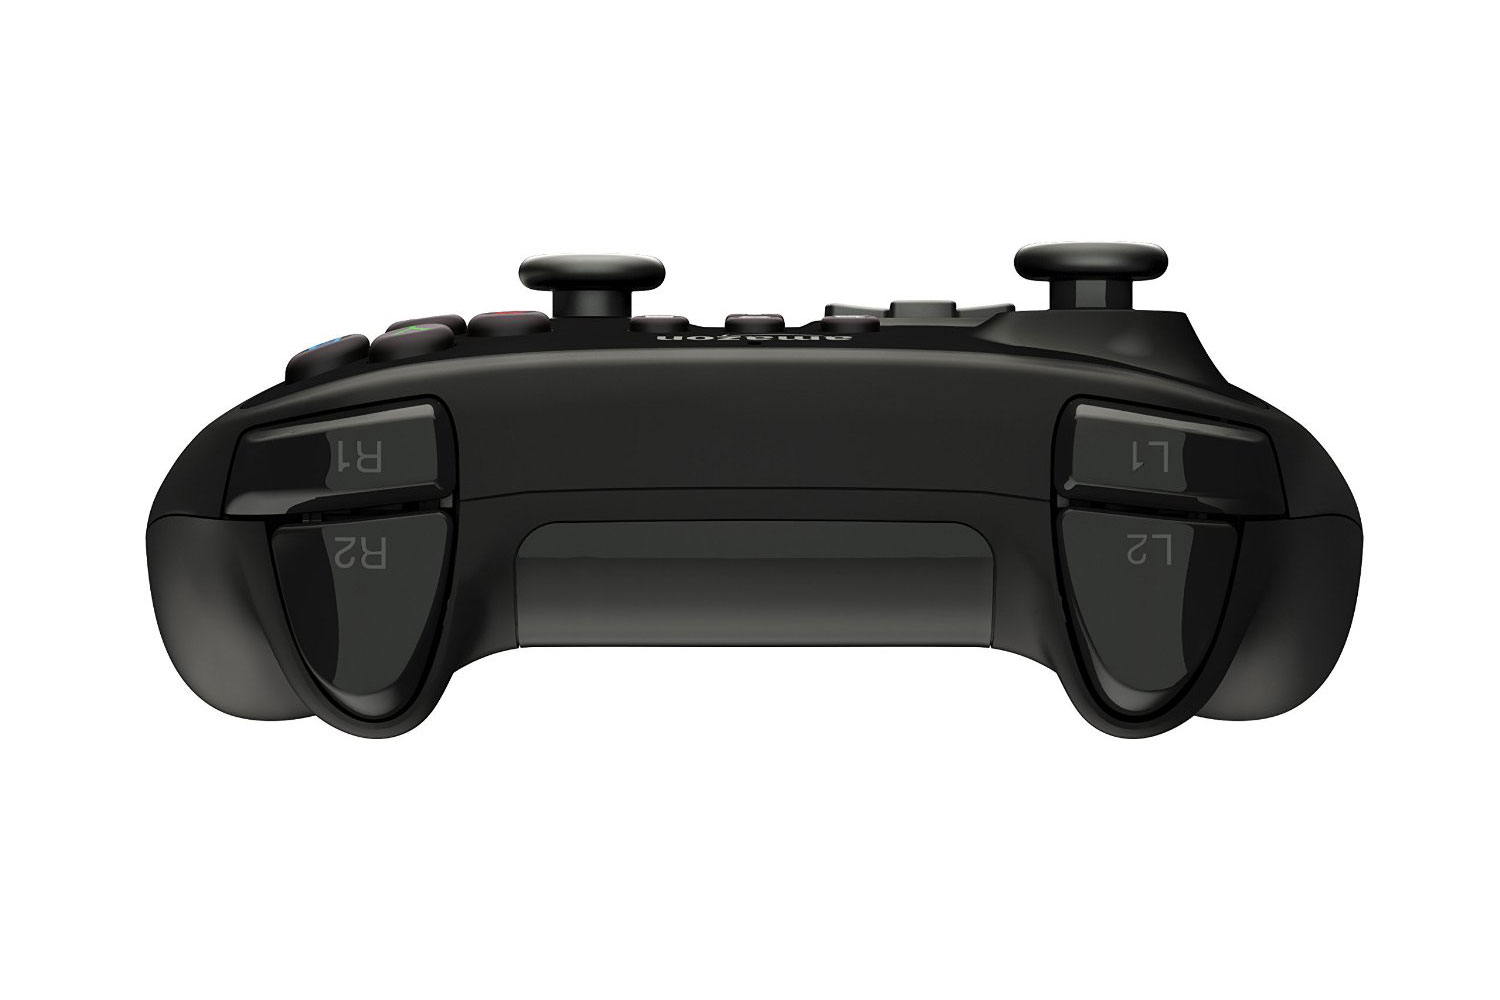 amazon fire tv 2015 news all new game controller 8